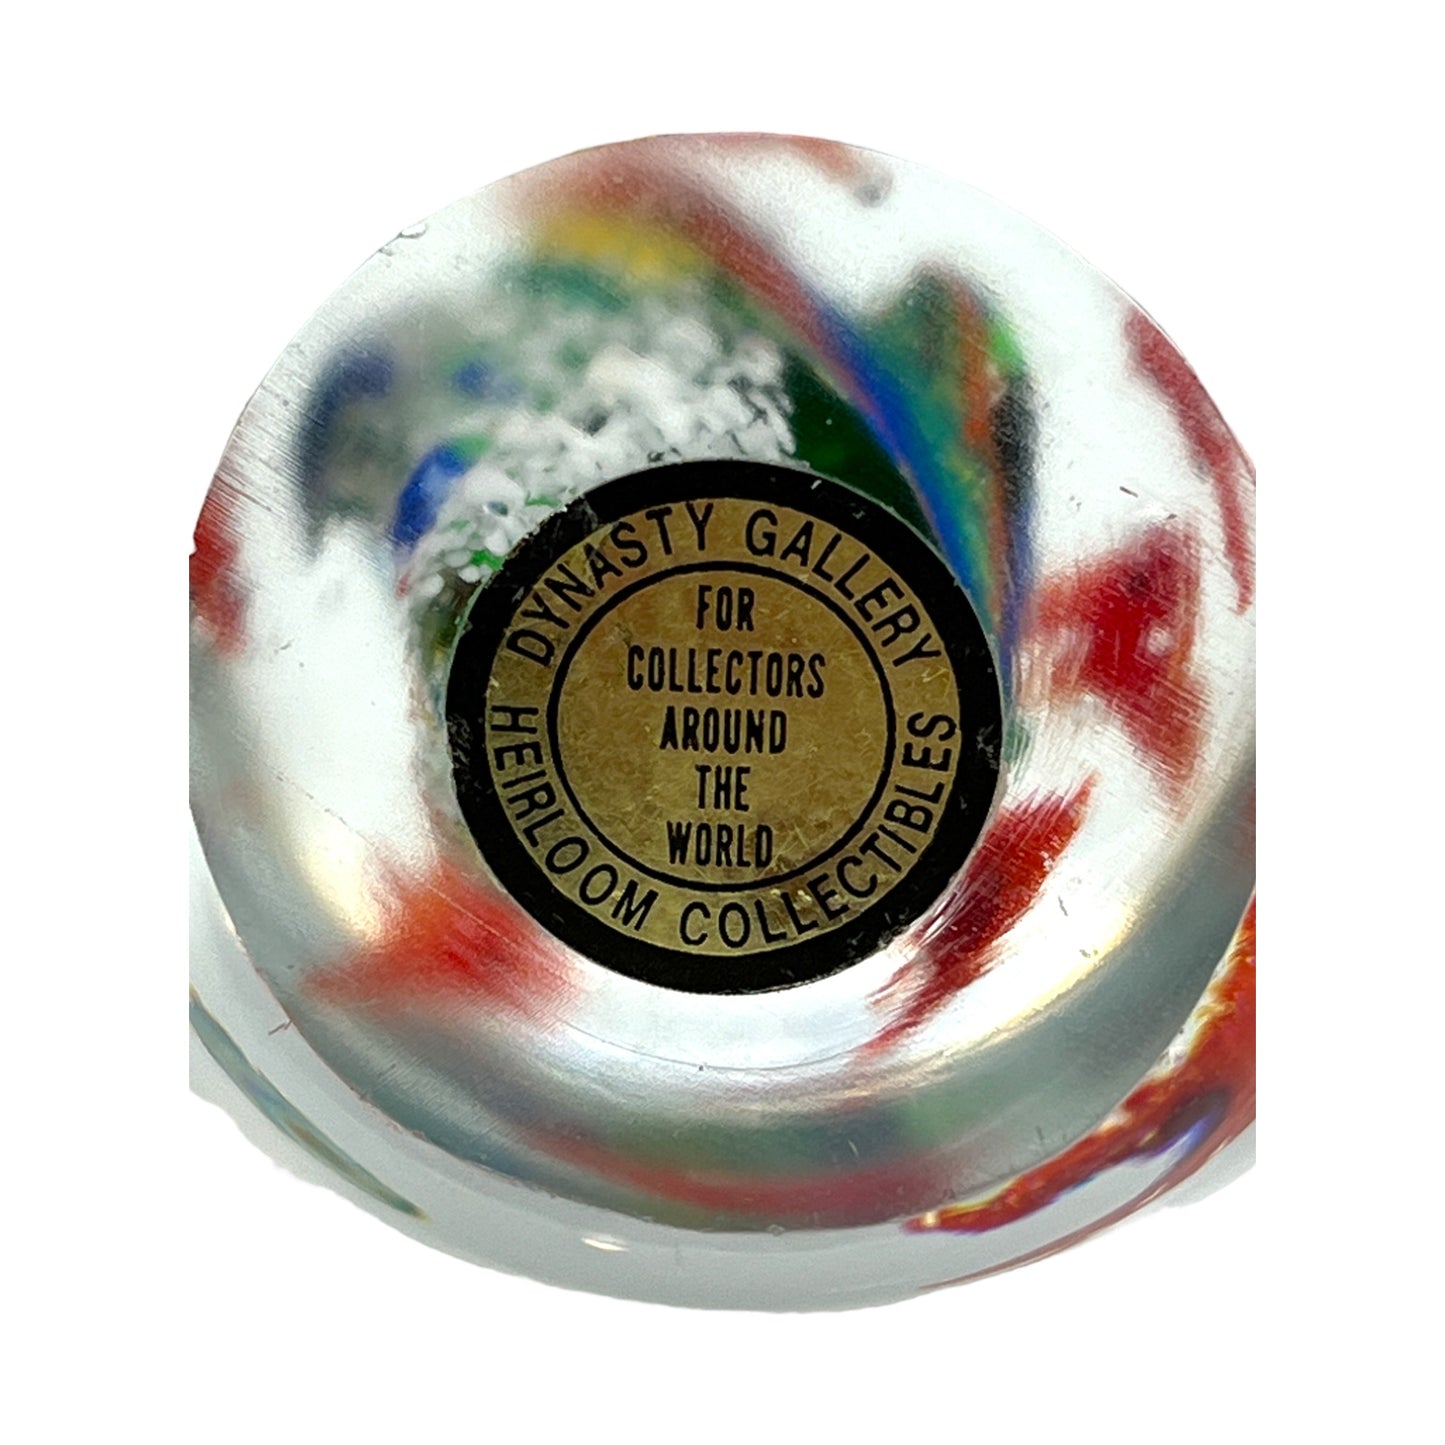 Oceanic Oasis Paperweight